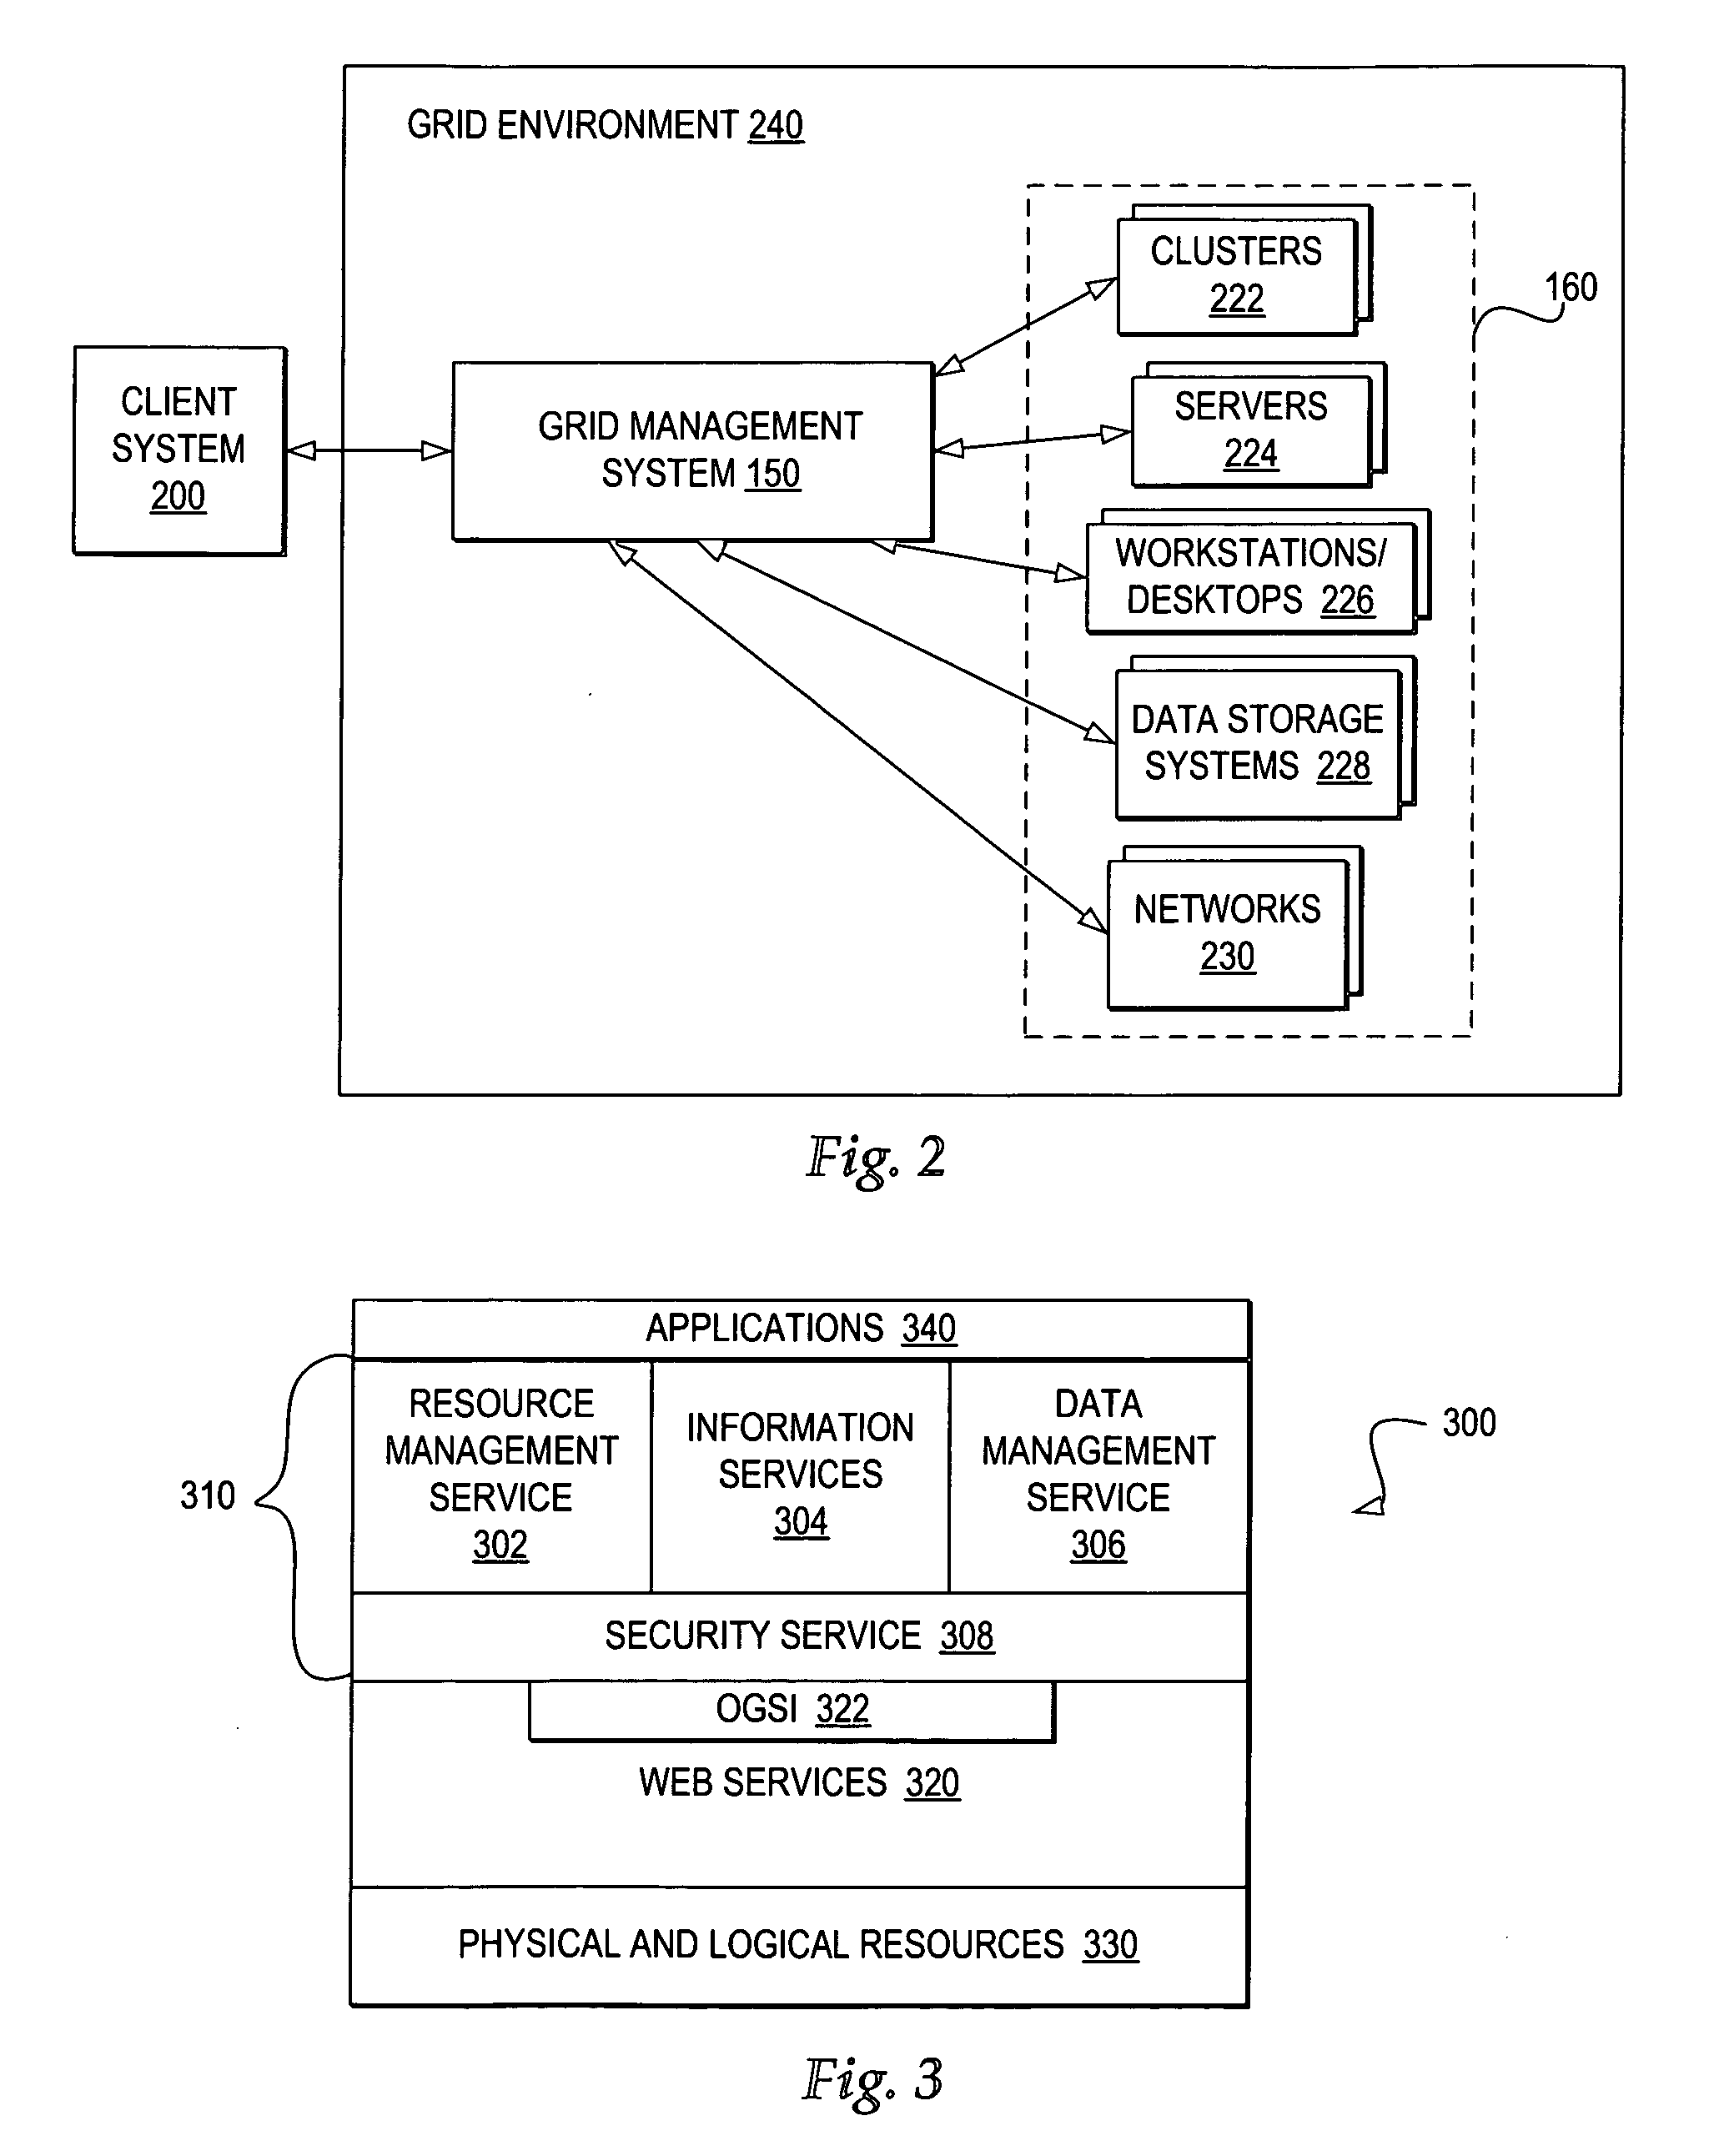 Managing analysis of a degraded service in a grid environment